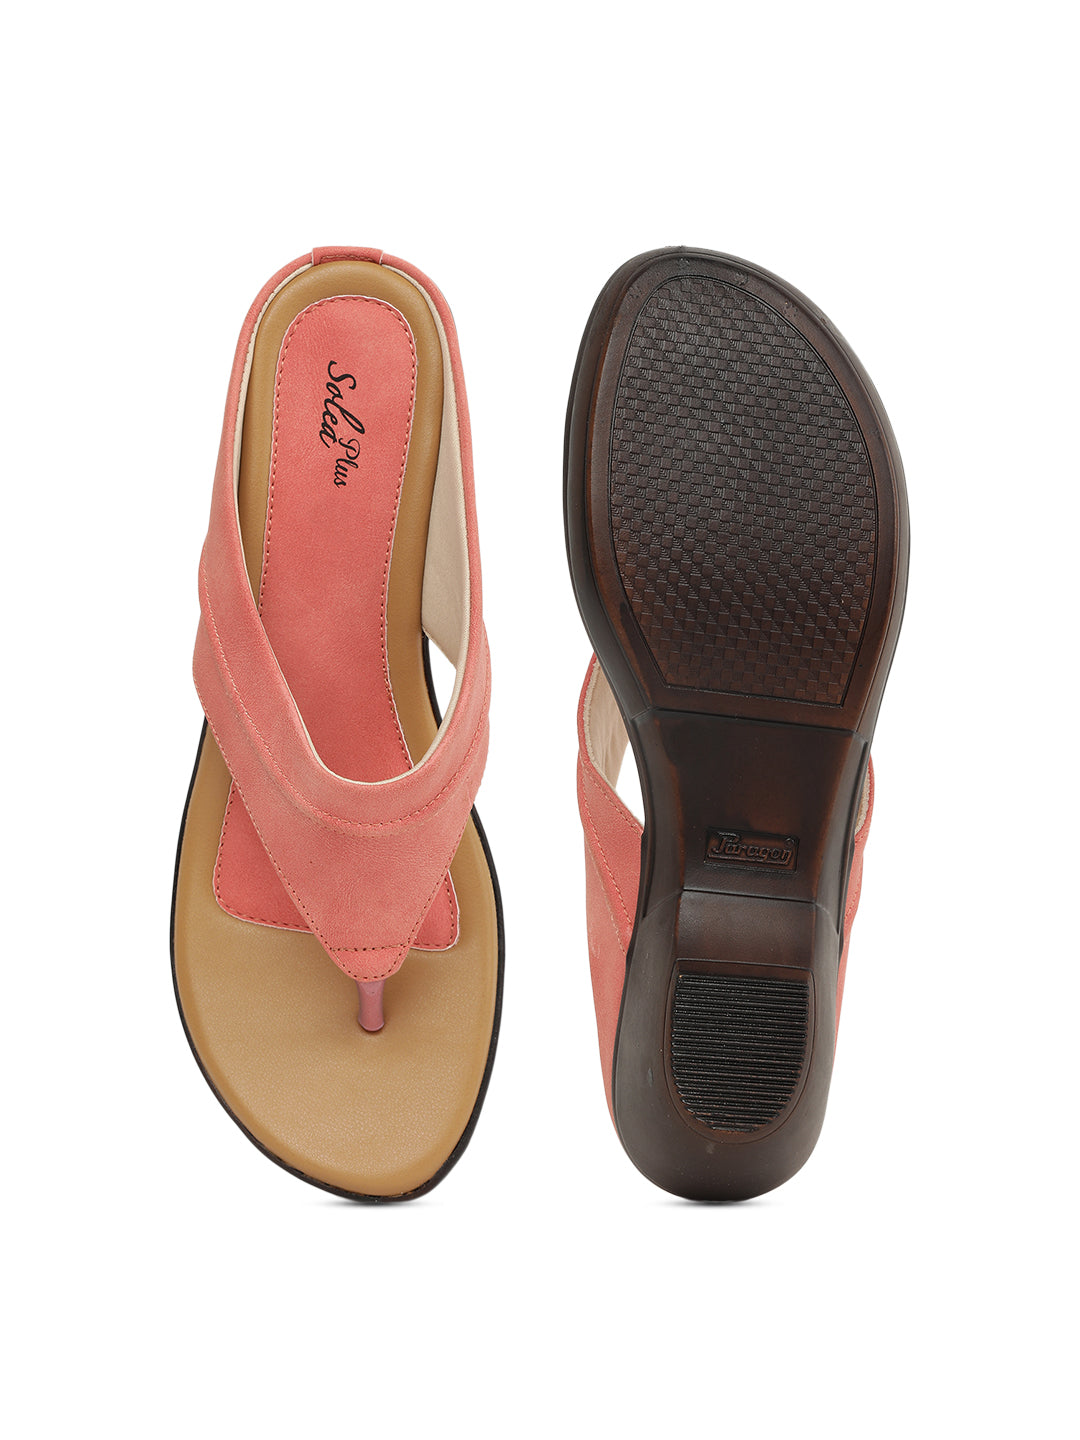 Paragon R10559L Women Sandals | Casual &amp; Formal Sandals | Stylish, Comfortable &amp; Durable | For Daily &amp; Occasion Wear